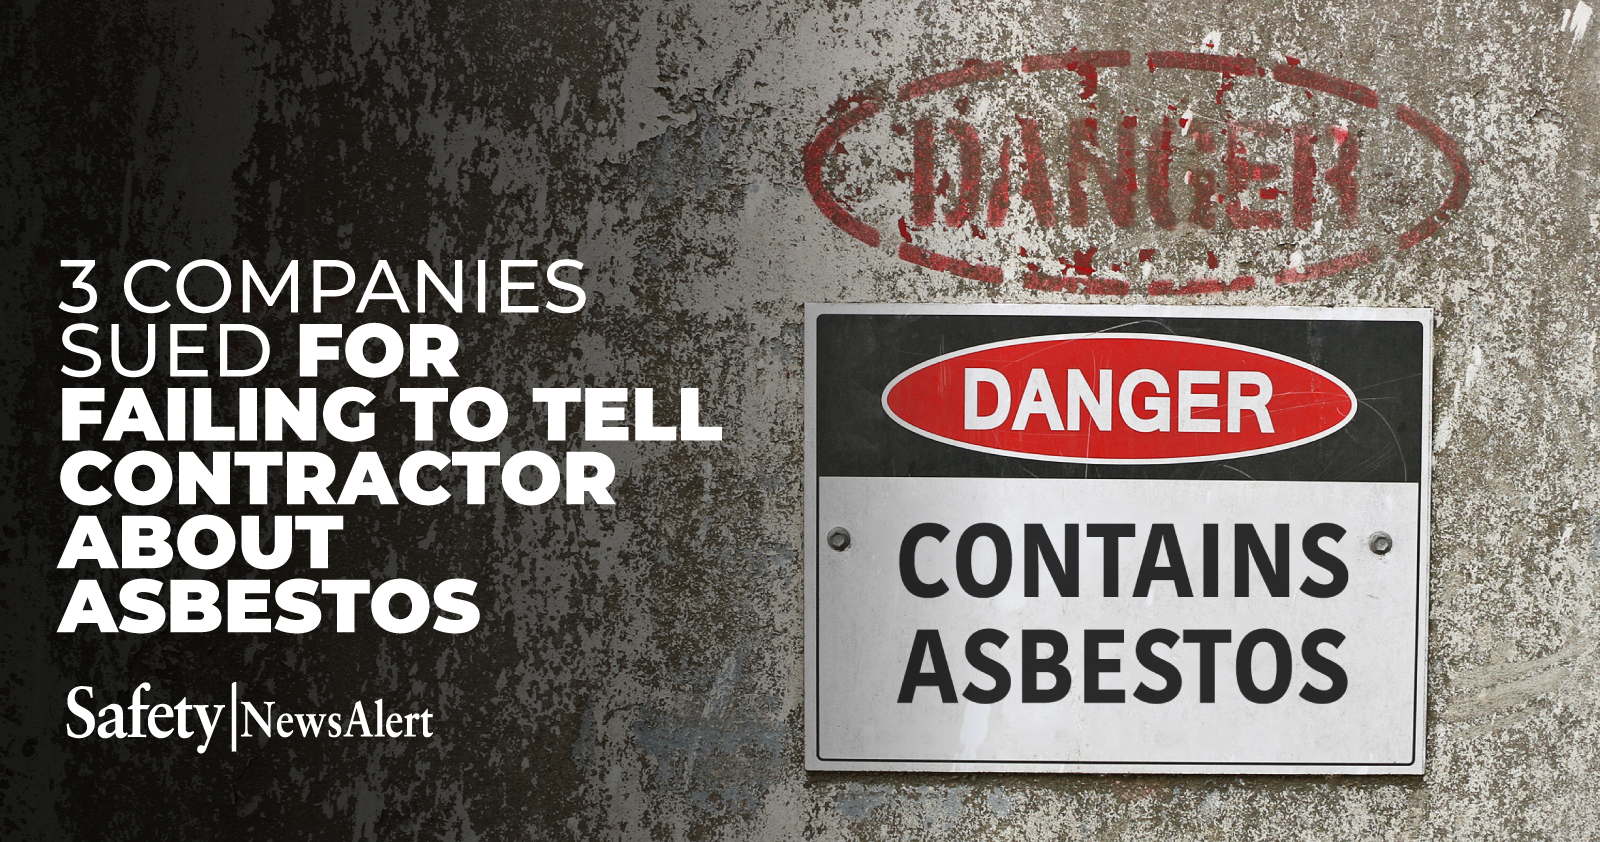 3 companies sued for failing to tell contractor about asbestos